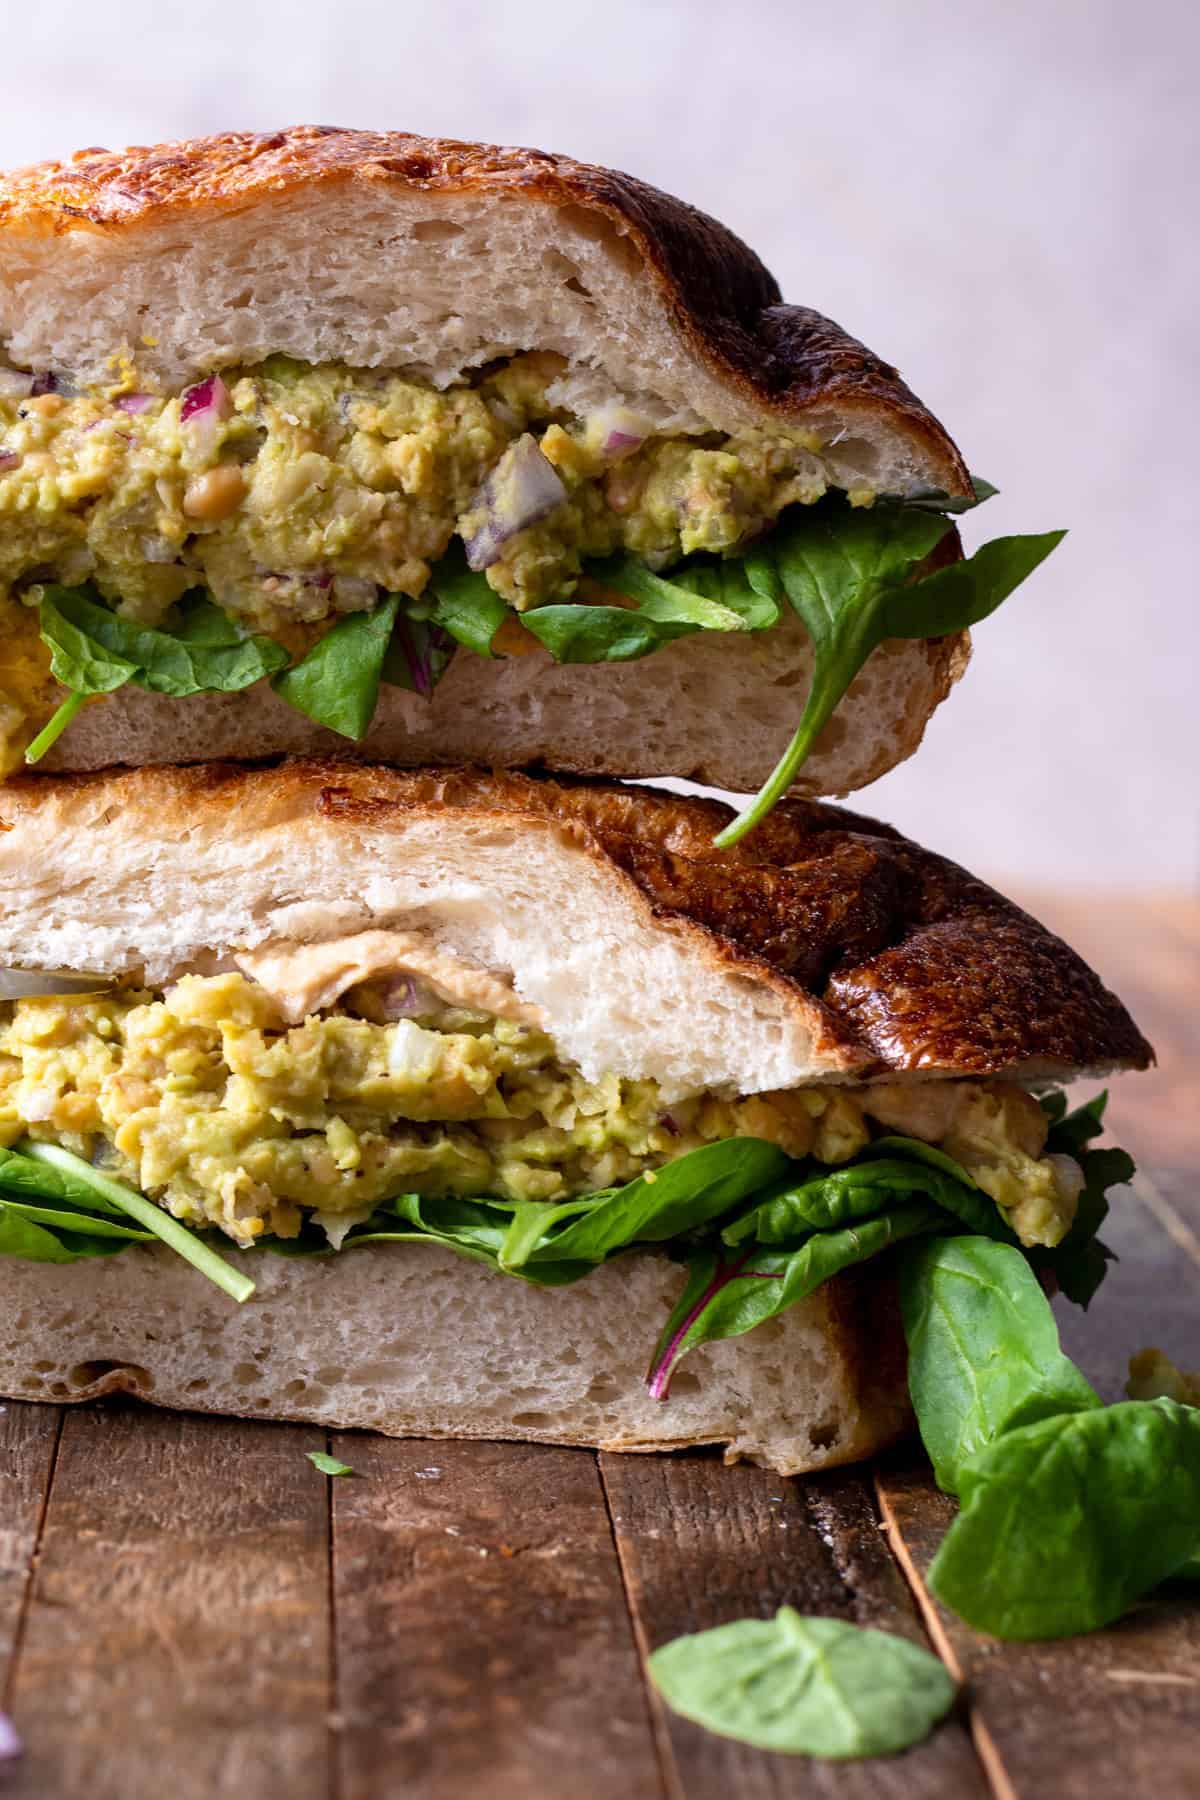 Chickpea avocado salad on french bread with spinach and hummus.